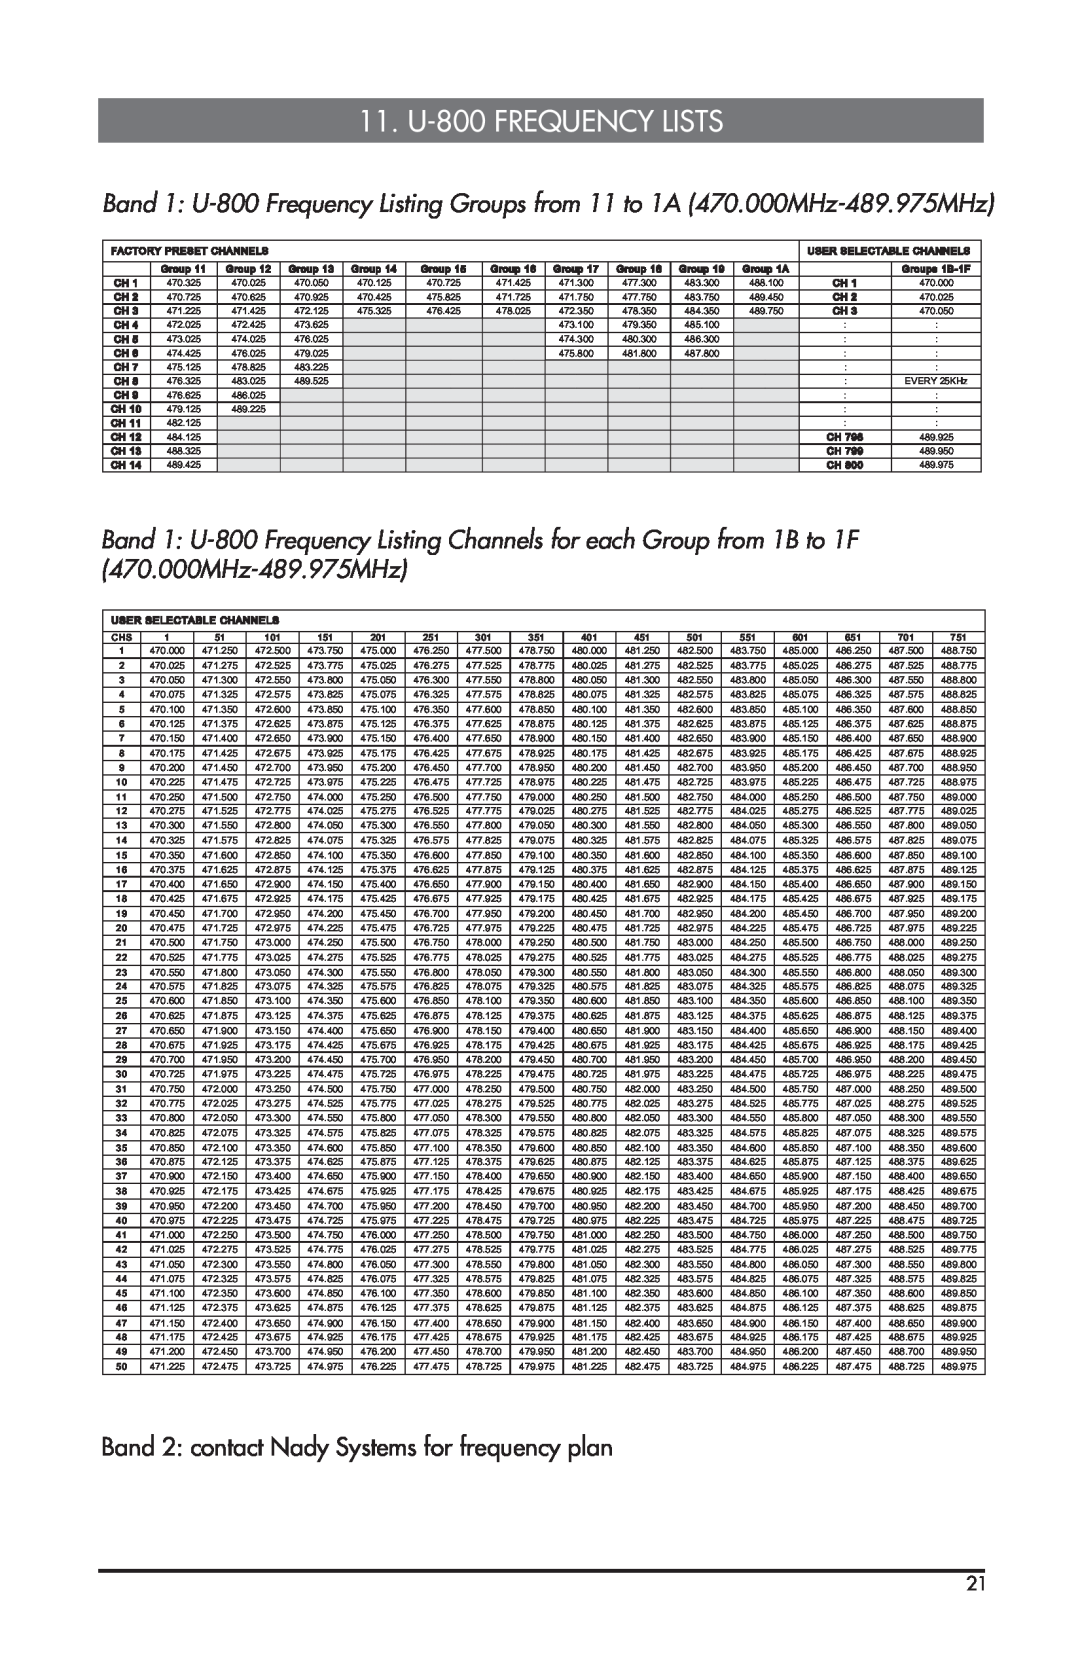 Nady Systems owner manual 11. U-800FREQUENCY LISTS, Band 2 contact Nady Systems for frequency plan 